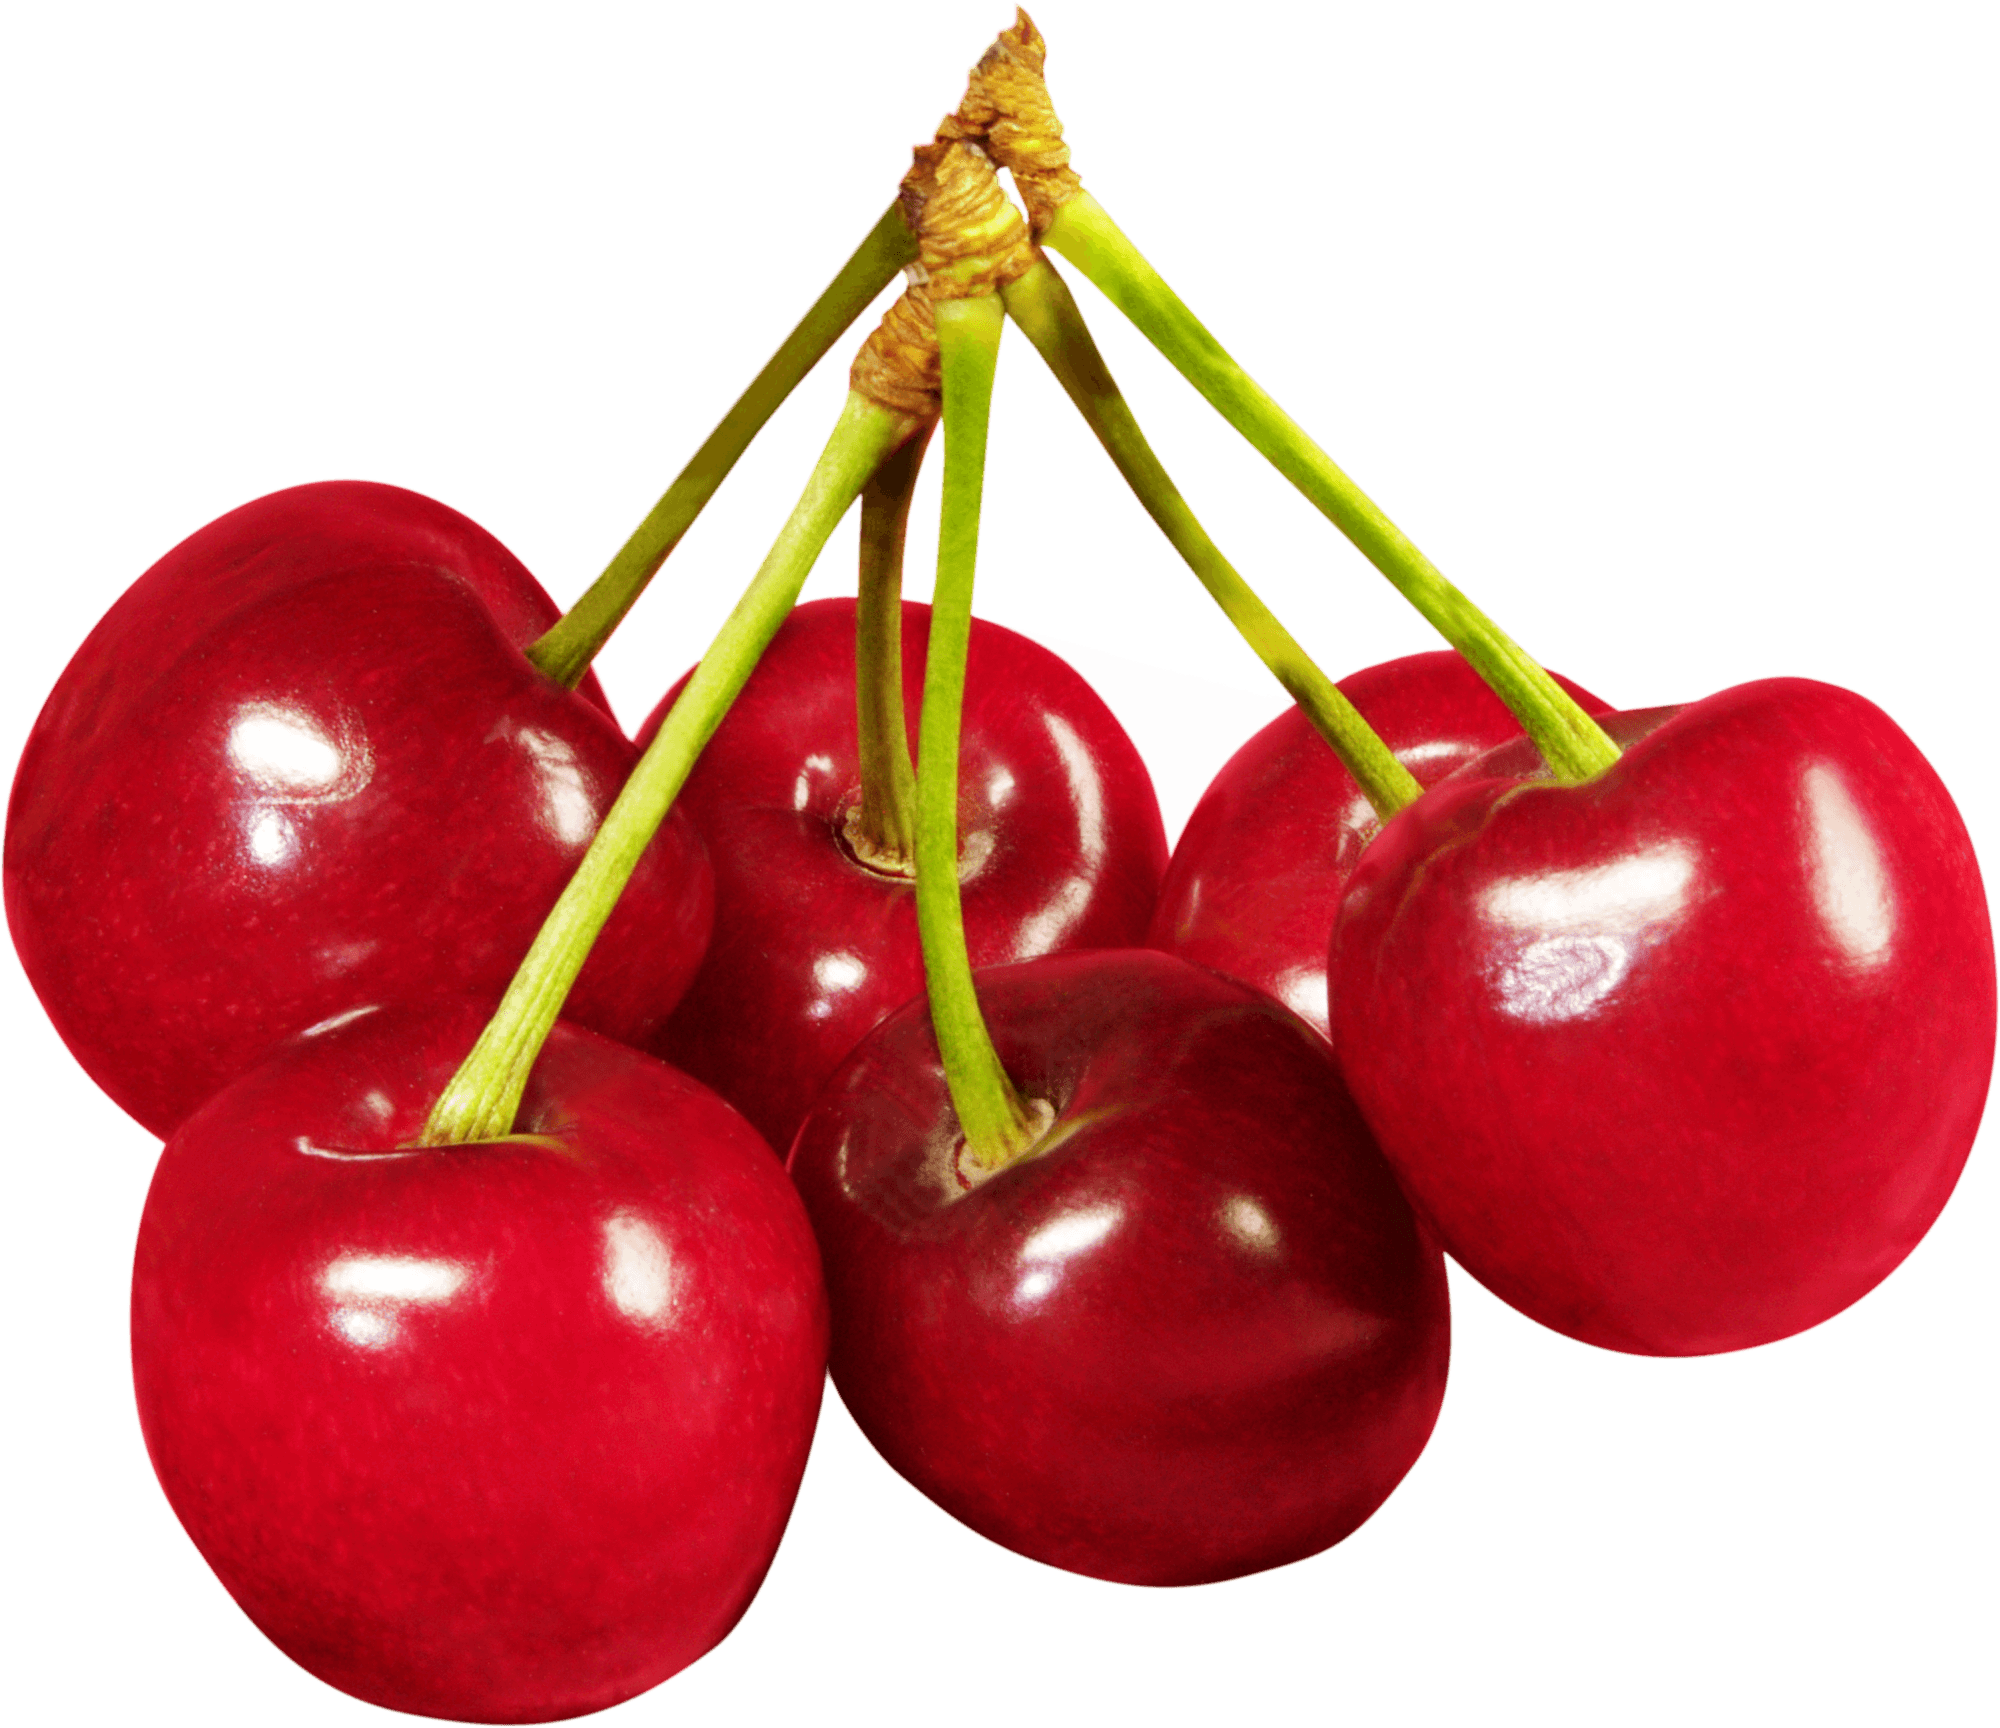 Red Cherry Png Image Download Png Image - Cherry, Transparent background PNG HD thumbnail